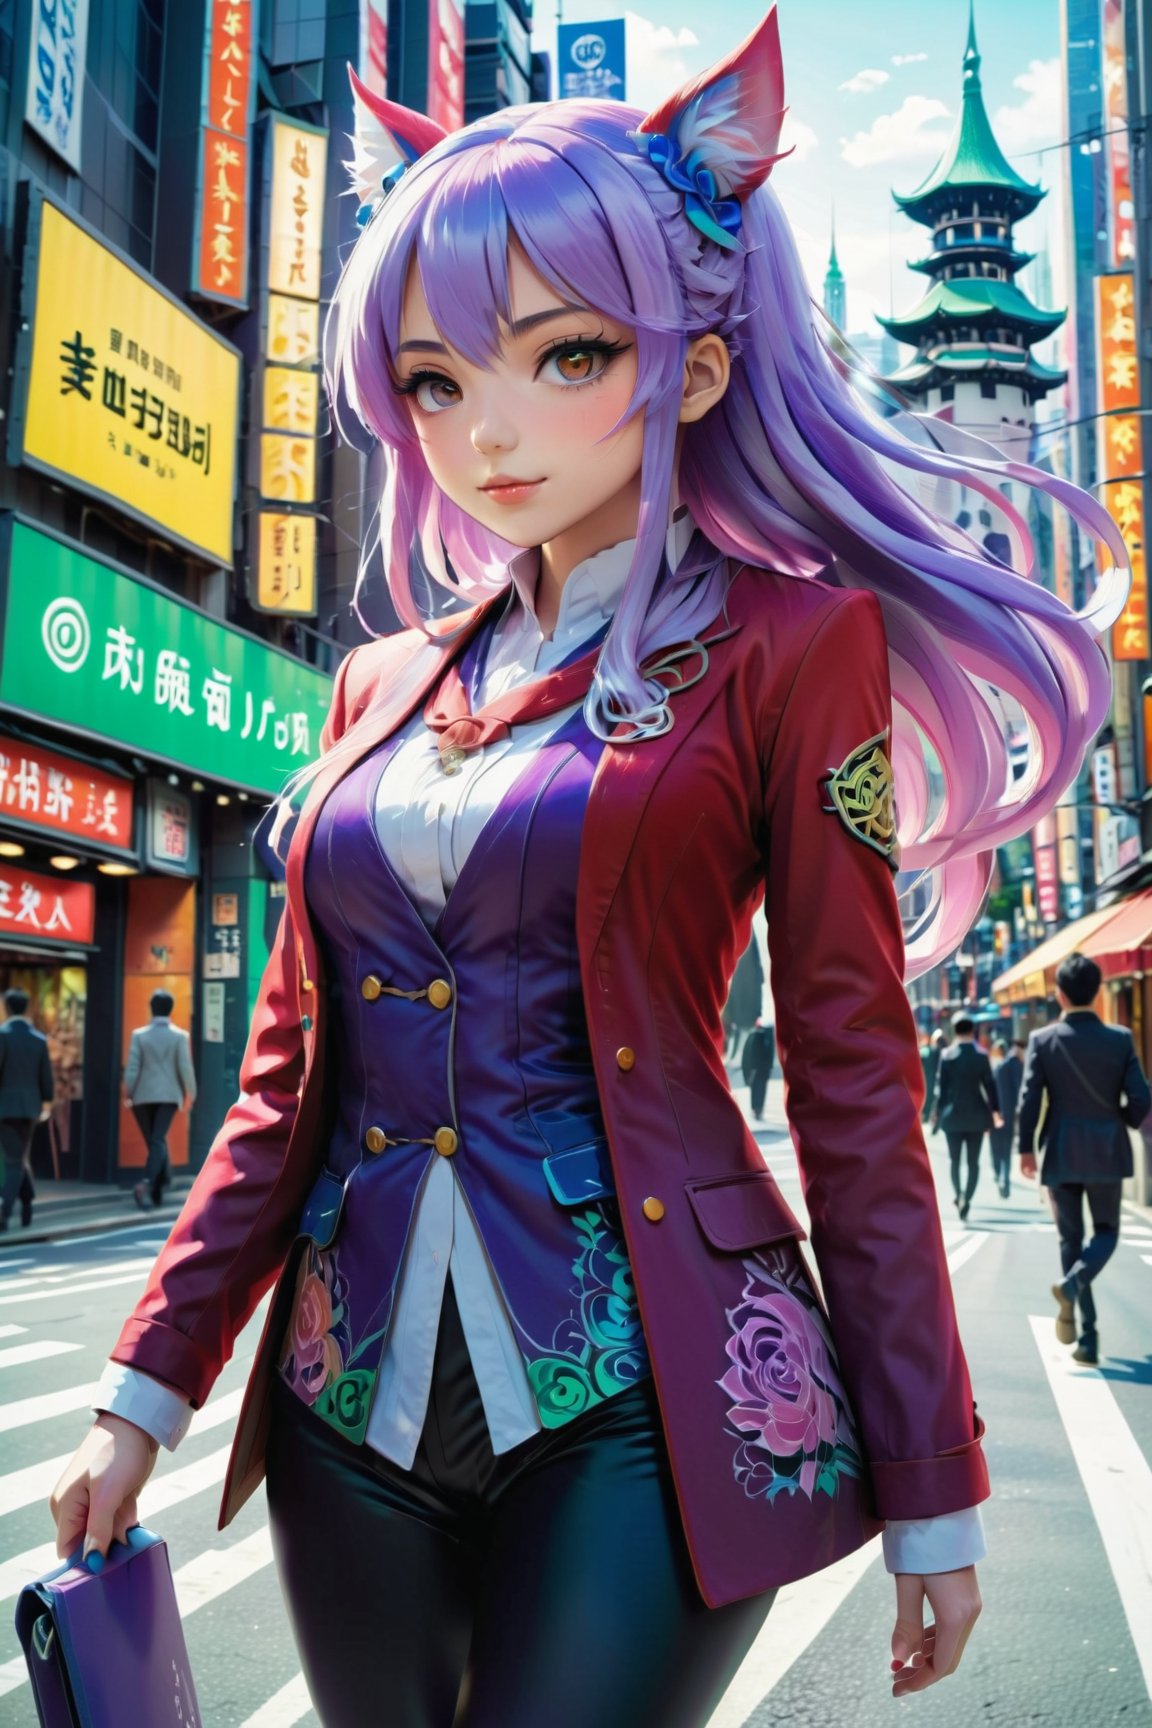 (2D anime style), a girl wearing red blazer and black leggins happily walking by shibuya, vibrant colors, soft pastels, beautiful 2D illustration by MSchiffer, intricately detailed, focus on face, detailed face, sharp image, (darling in the franx merged with rozen maiden), (((cel-shaded))), ((cel shading)), ink contours, purple and orange

